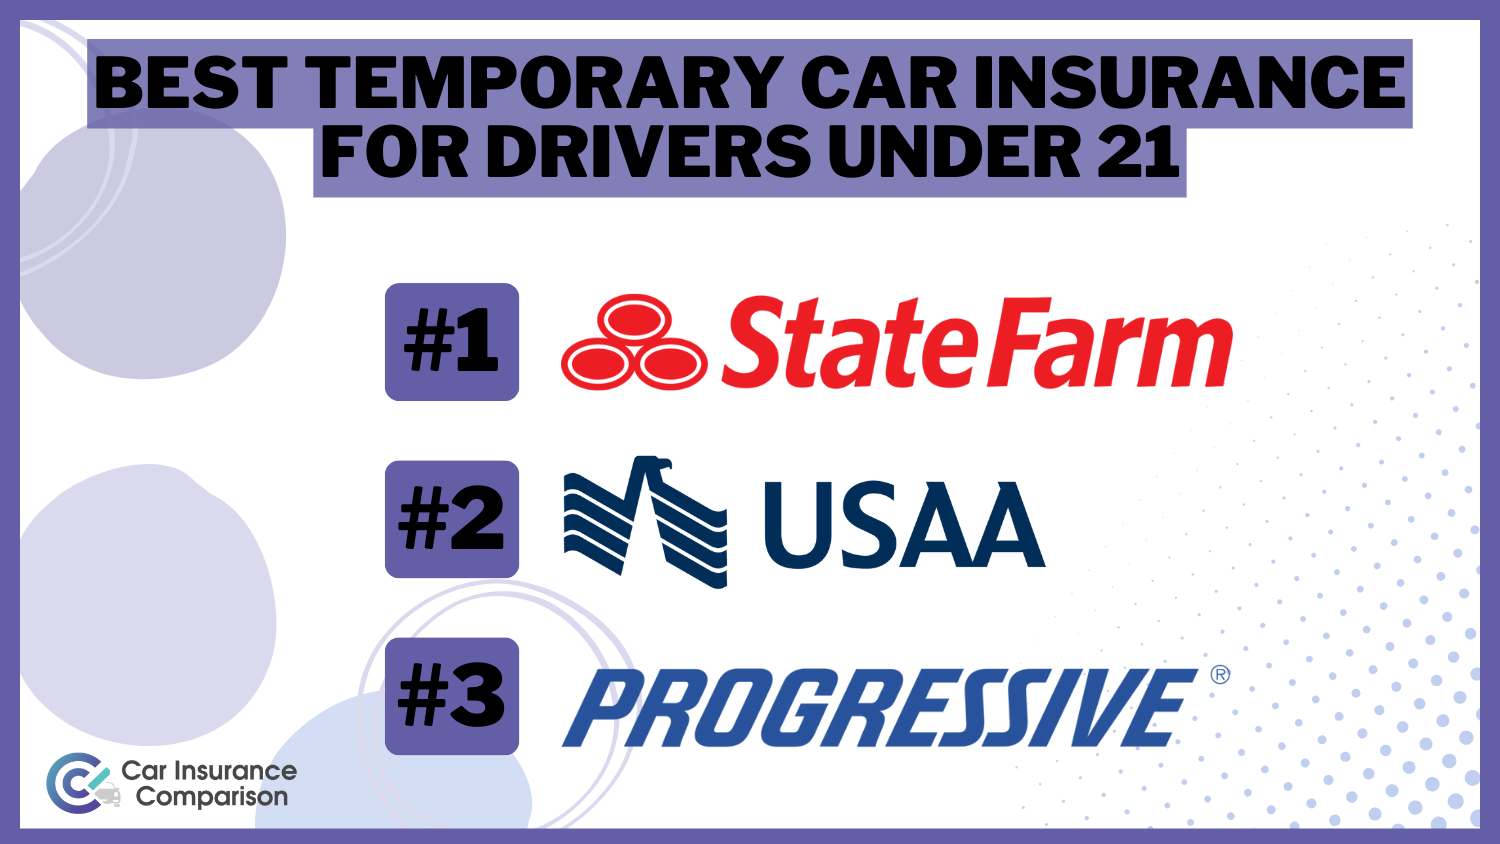 State Farm, USAA, and Progressive: Best Temporary Car Insurance for Drivers Under 21